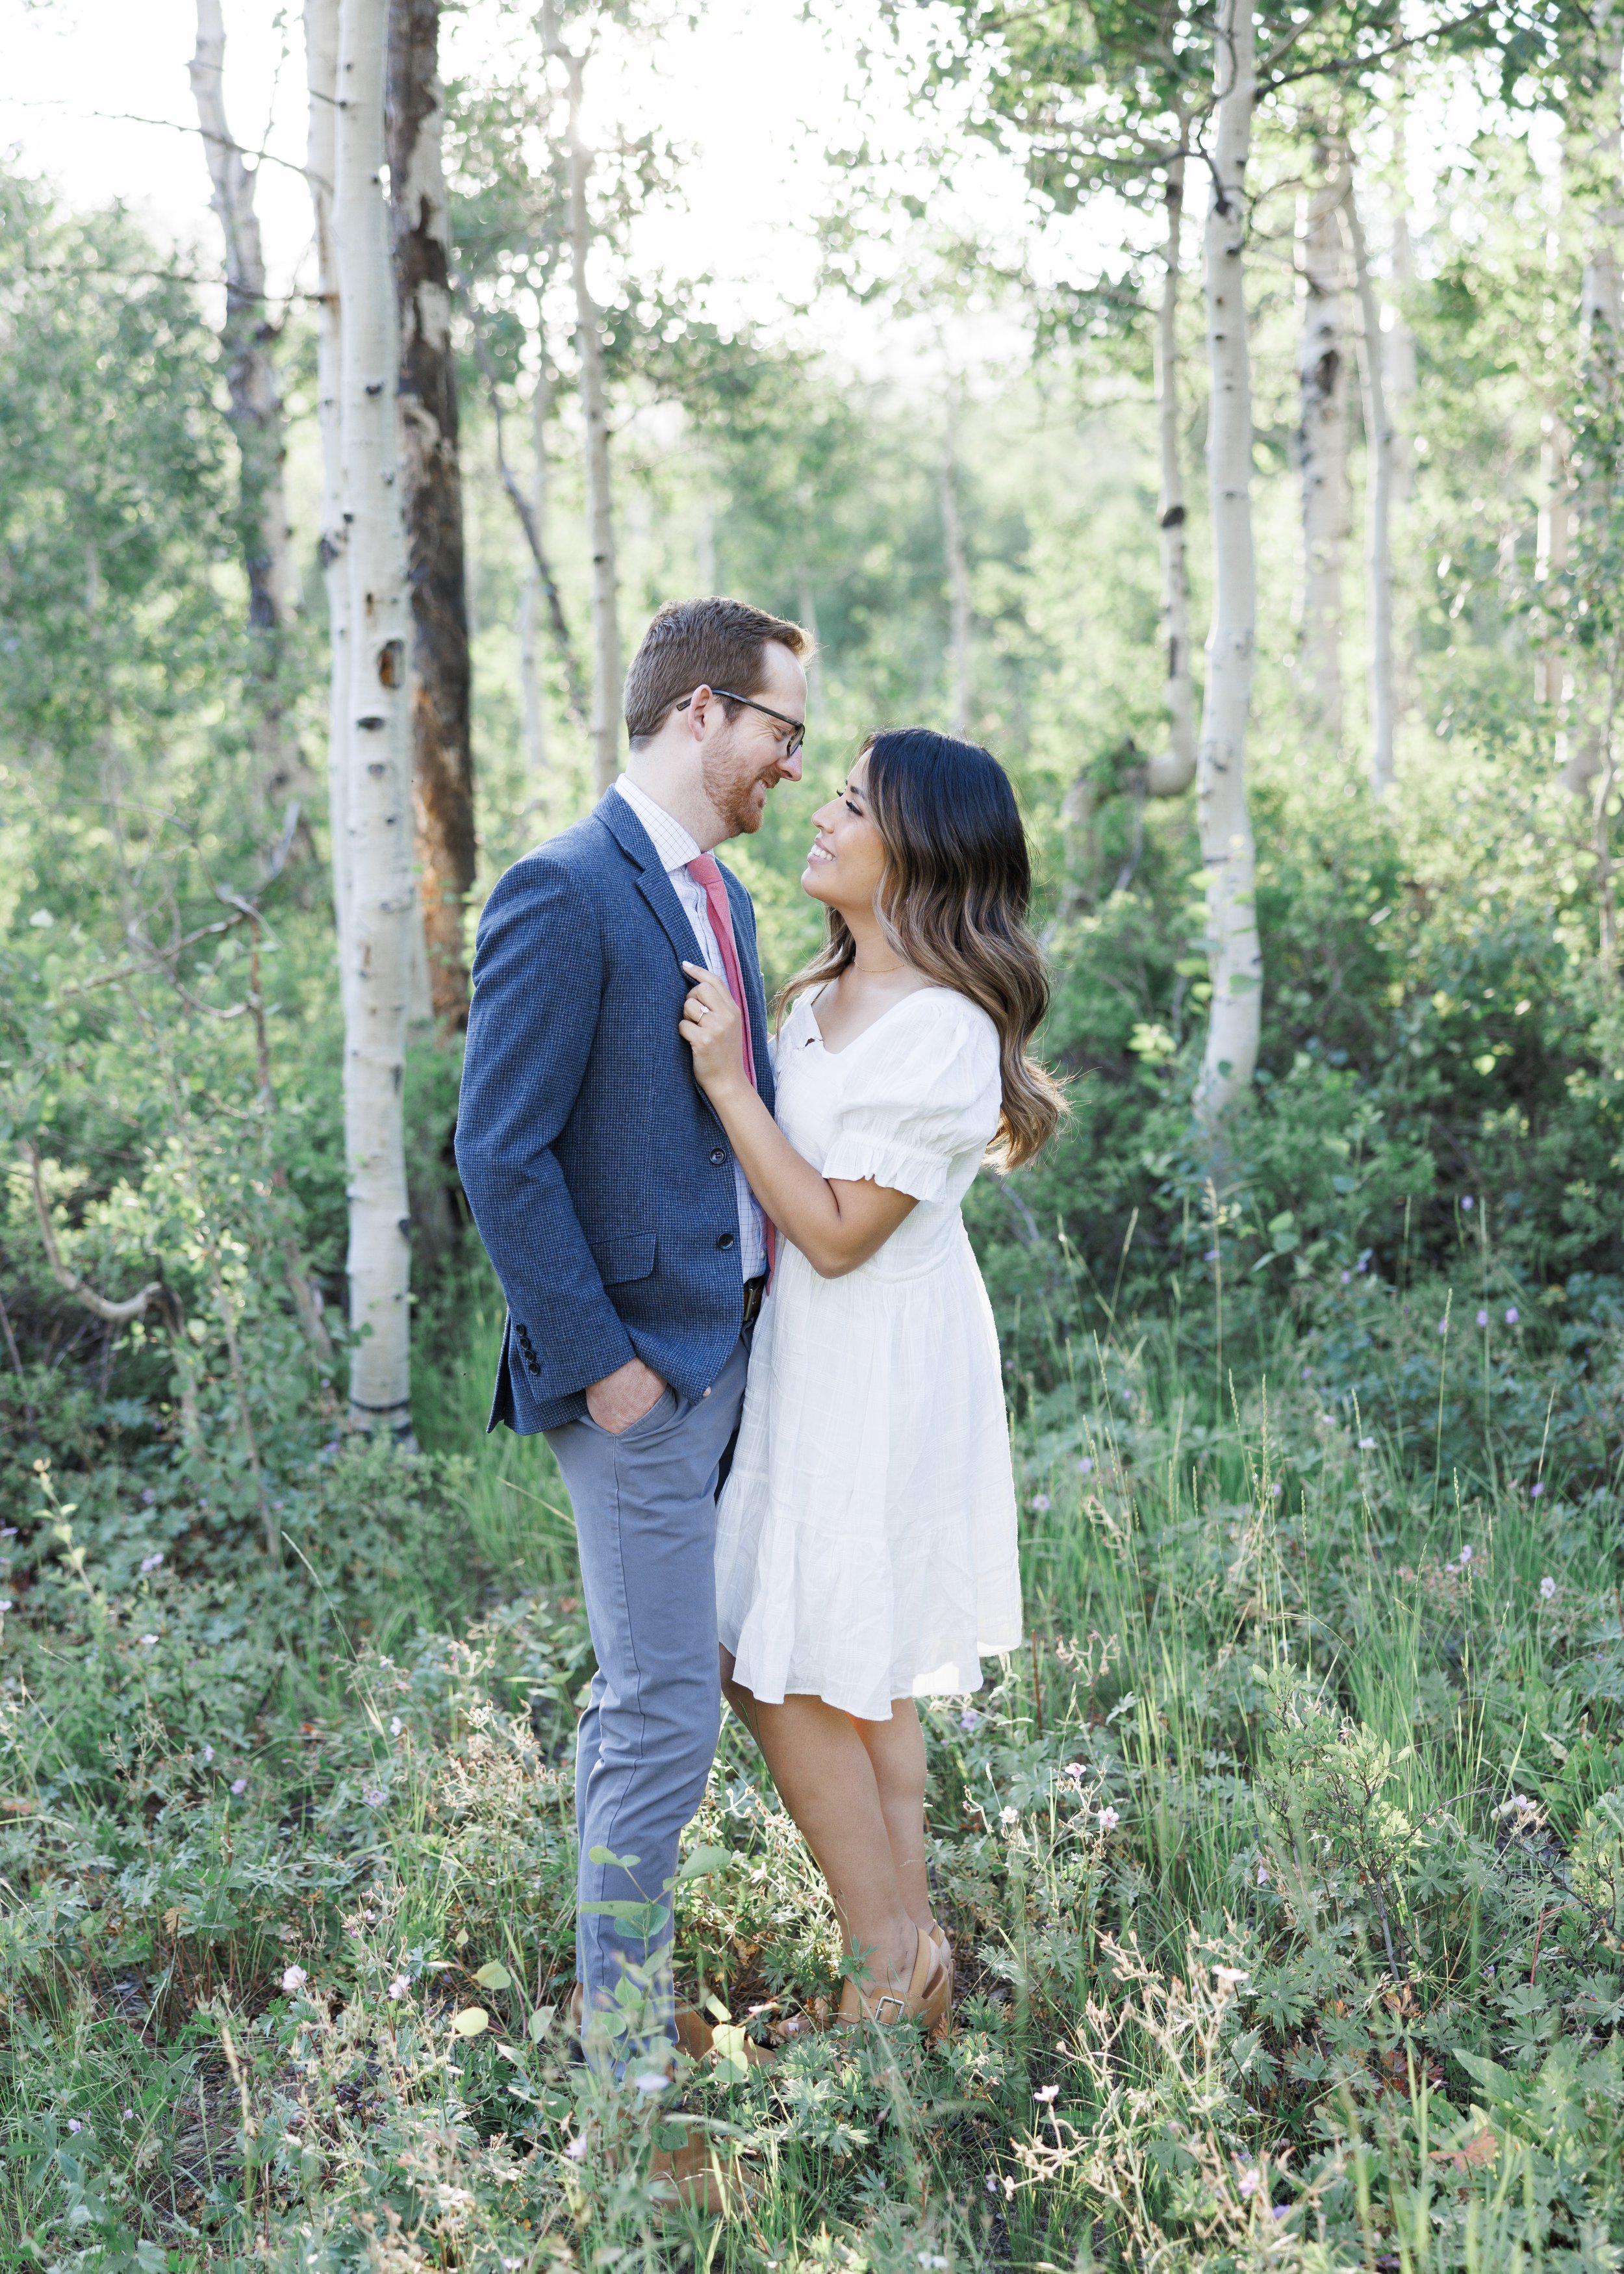  Simple, classy engagement photography captured by Savanna Richardson Photography in the Utah mountains. Utah wedding photography #ParkCityEngagements #ParkCityPhotographers #SavannaRichardsonPhotography #SavannaRichardsonEngagements 